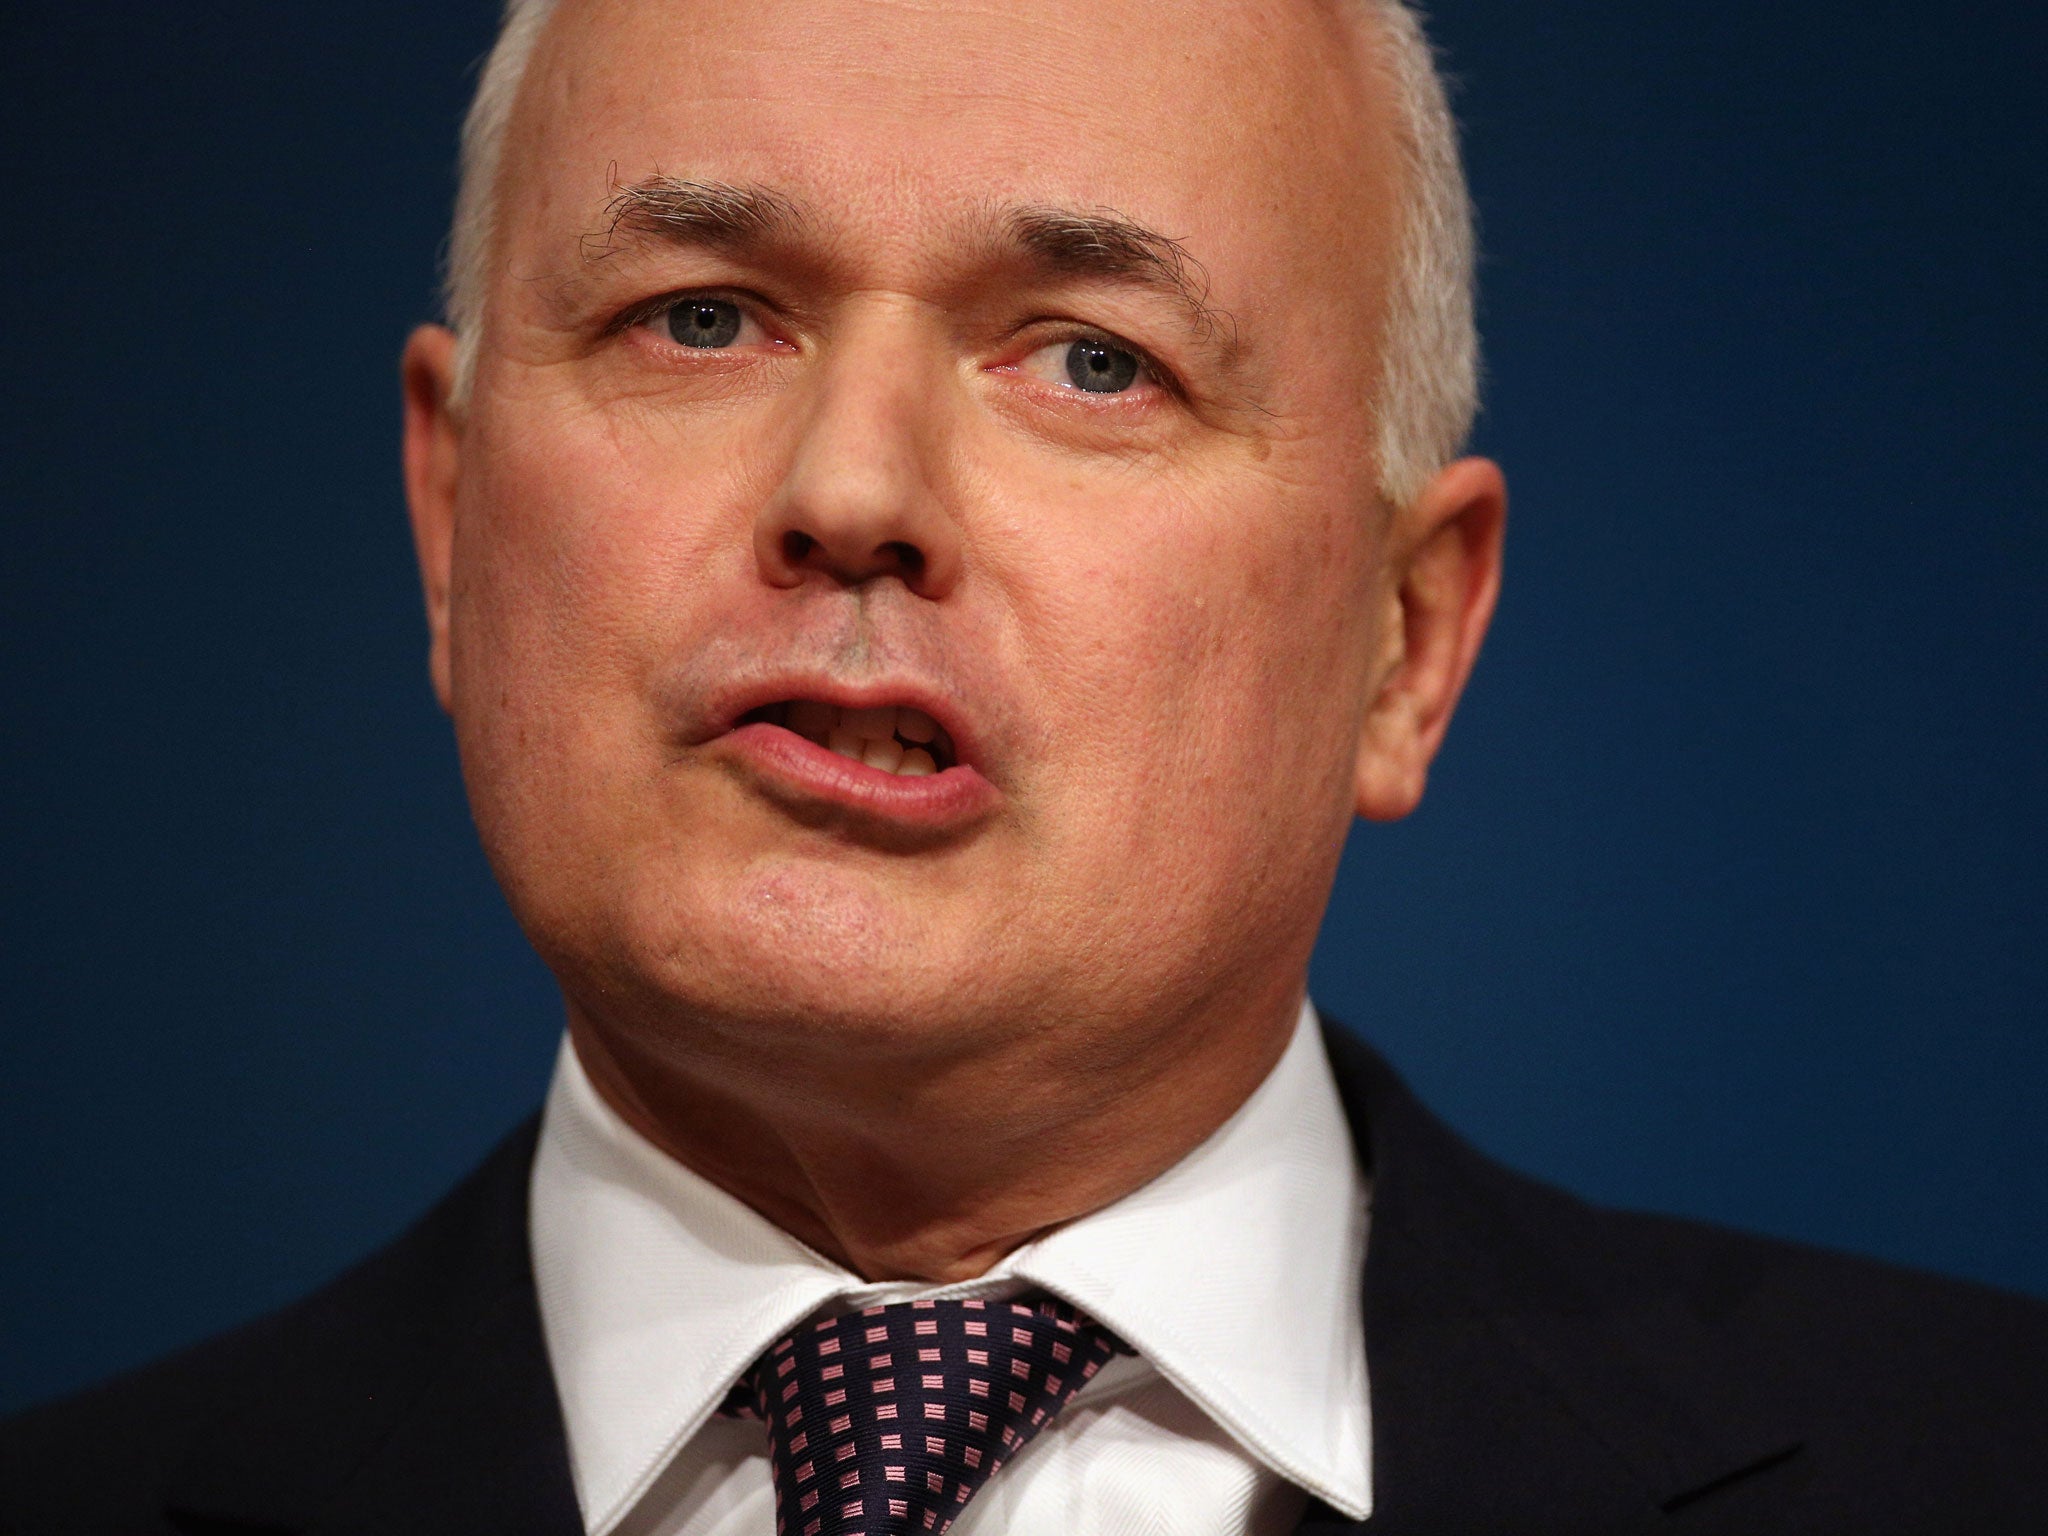 Secretary of State for Work and Pensions Iain Duncan Smith delivers his speech to the Conservative party conference in the International Convention Centre on October 8, 2012 in Birmingham, England.